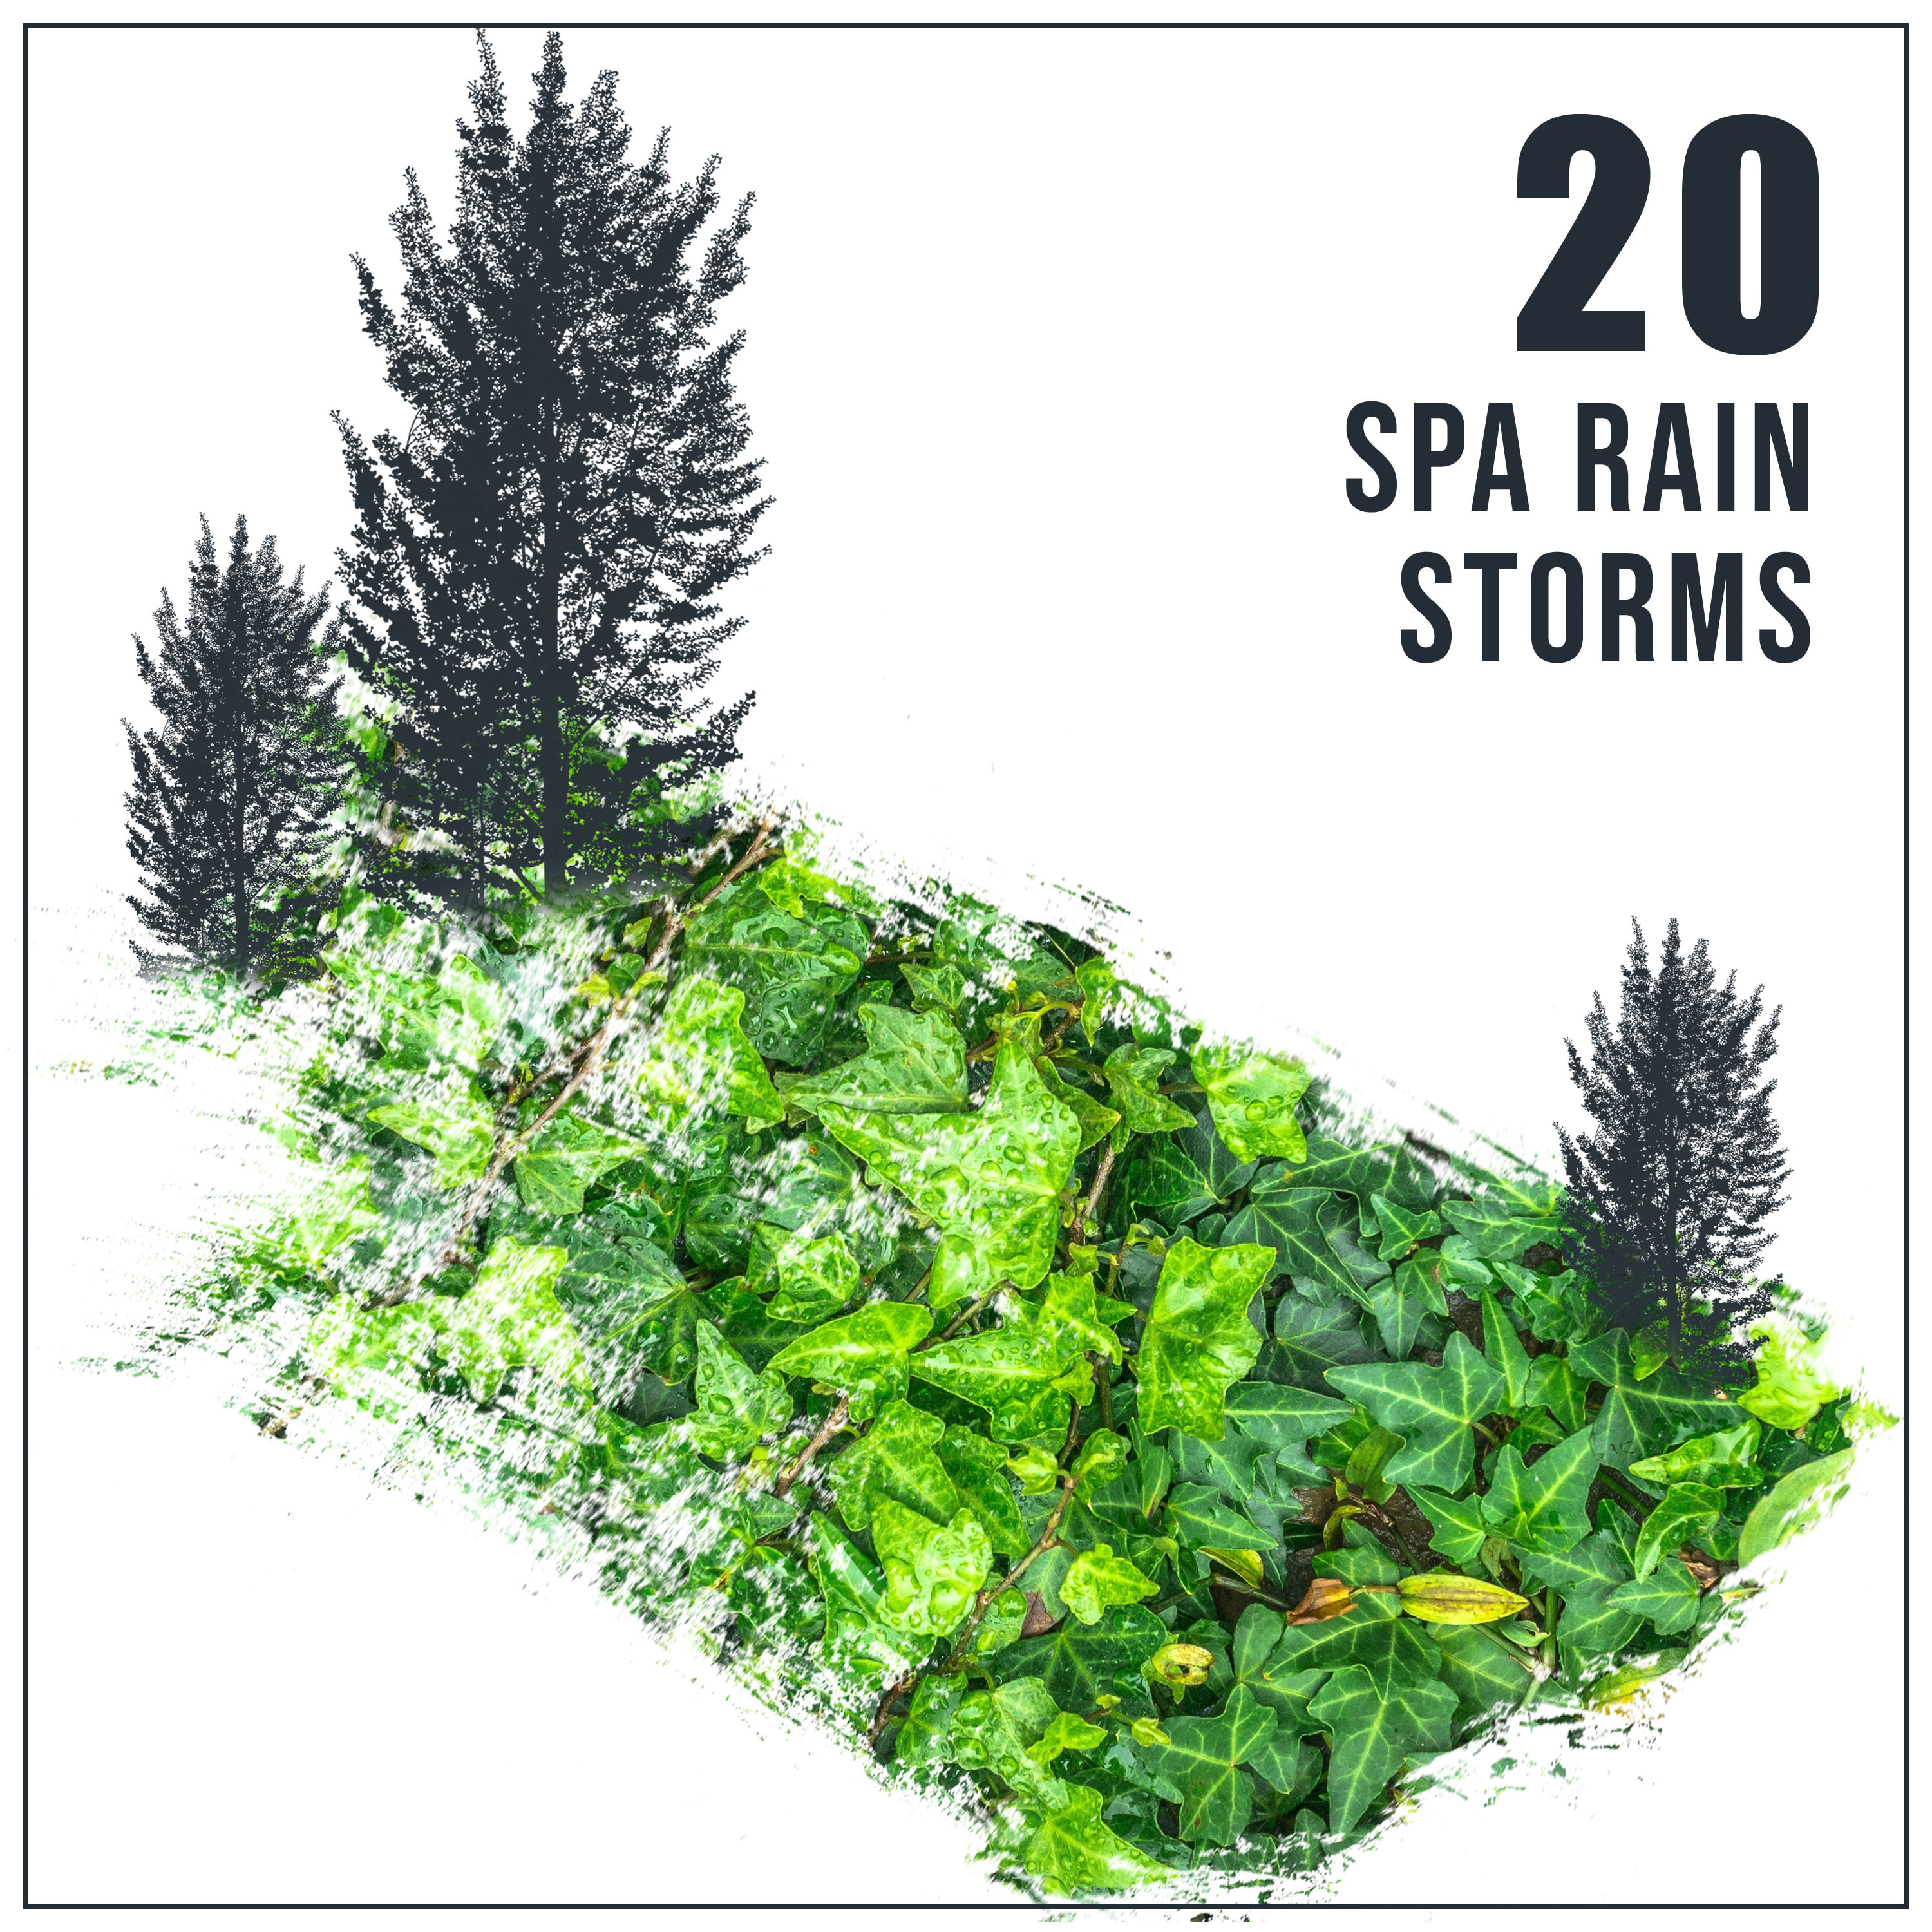 2018 Spa Rain Storms for Ultimate Relaxation